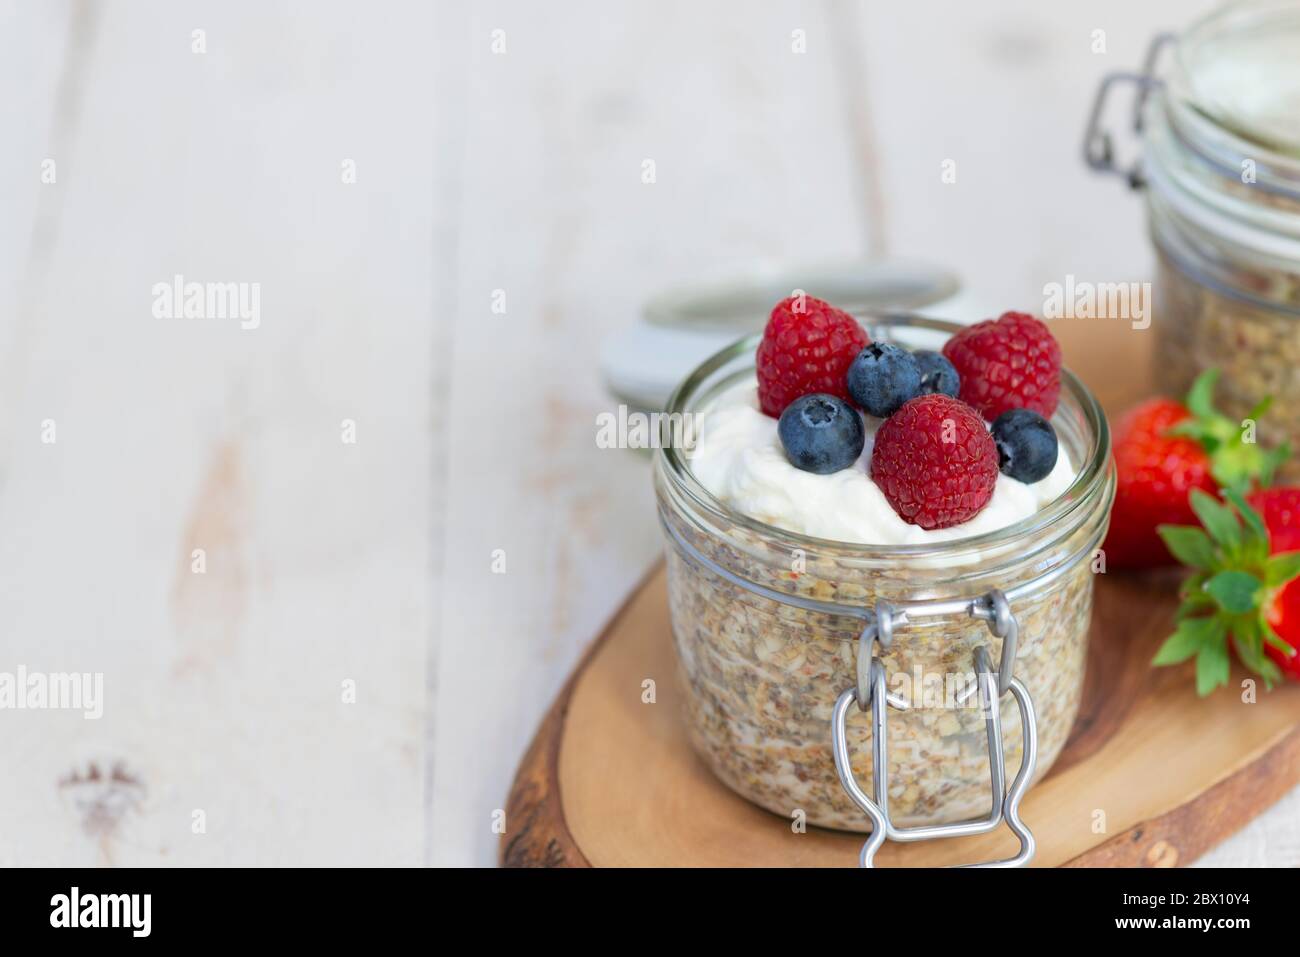 Overnight oats breakfast pots served with Greek yoghurt, blueberries and raspberries. Stock Photo